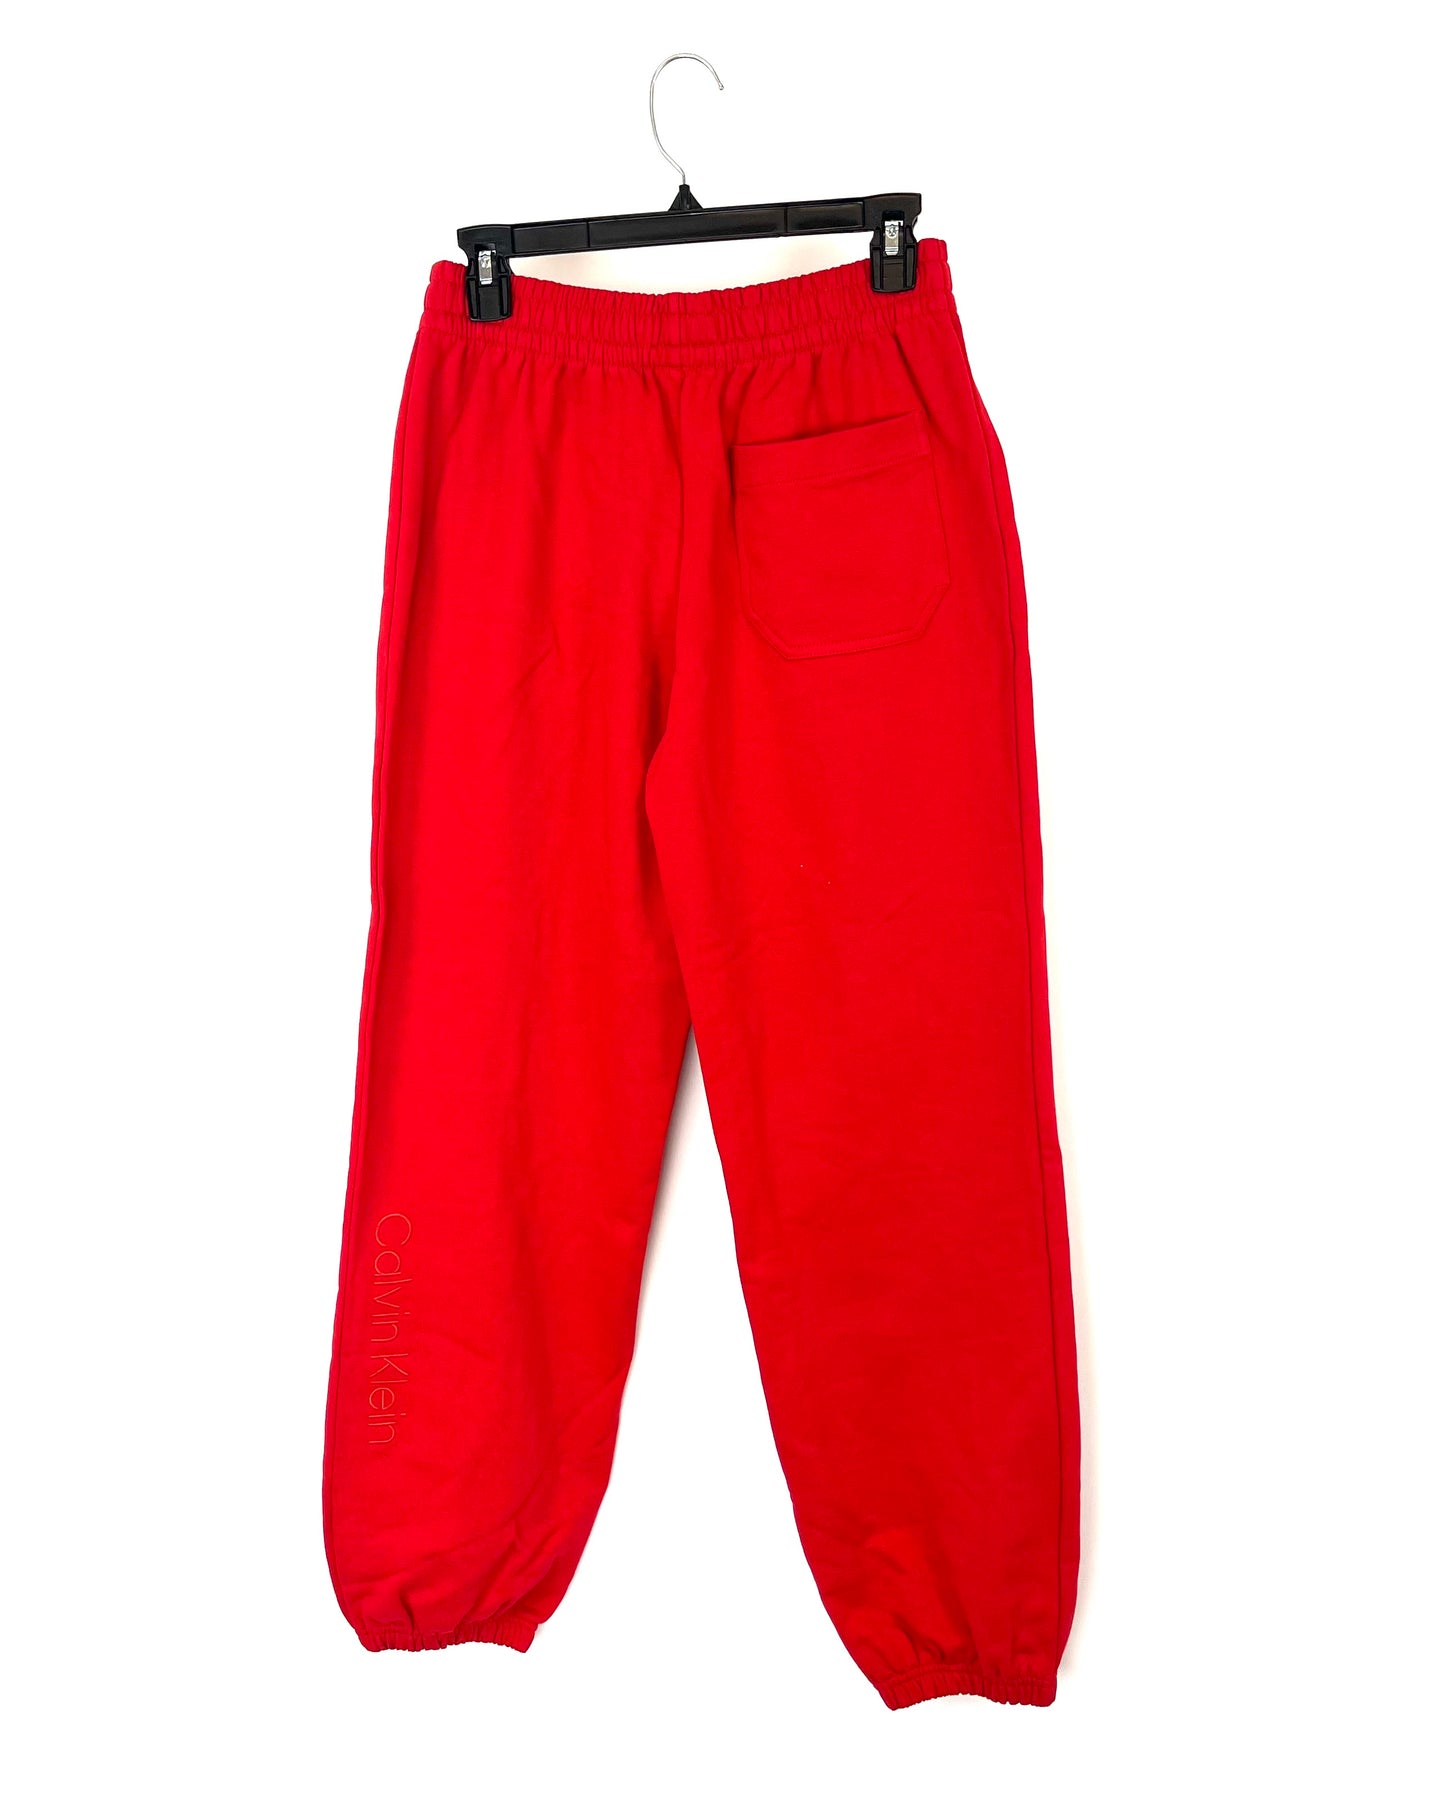 Red Calvin Small Klein – Foundation Sweatpants Fashion The - Athletic